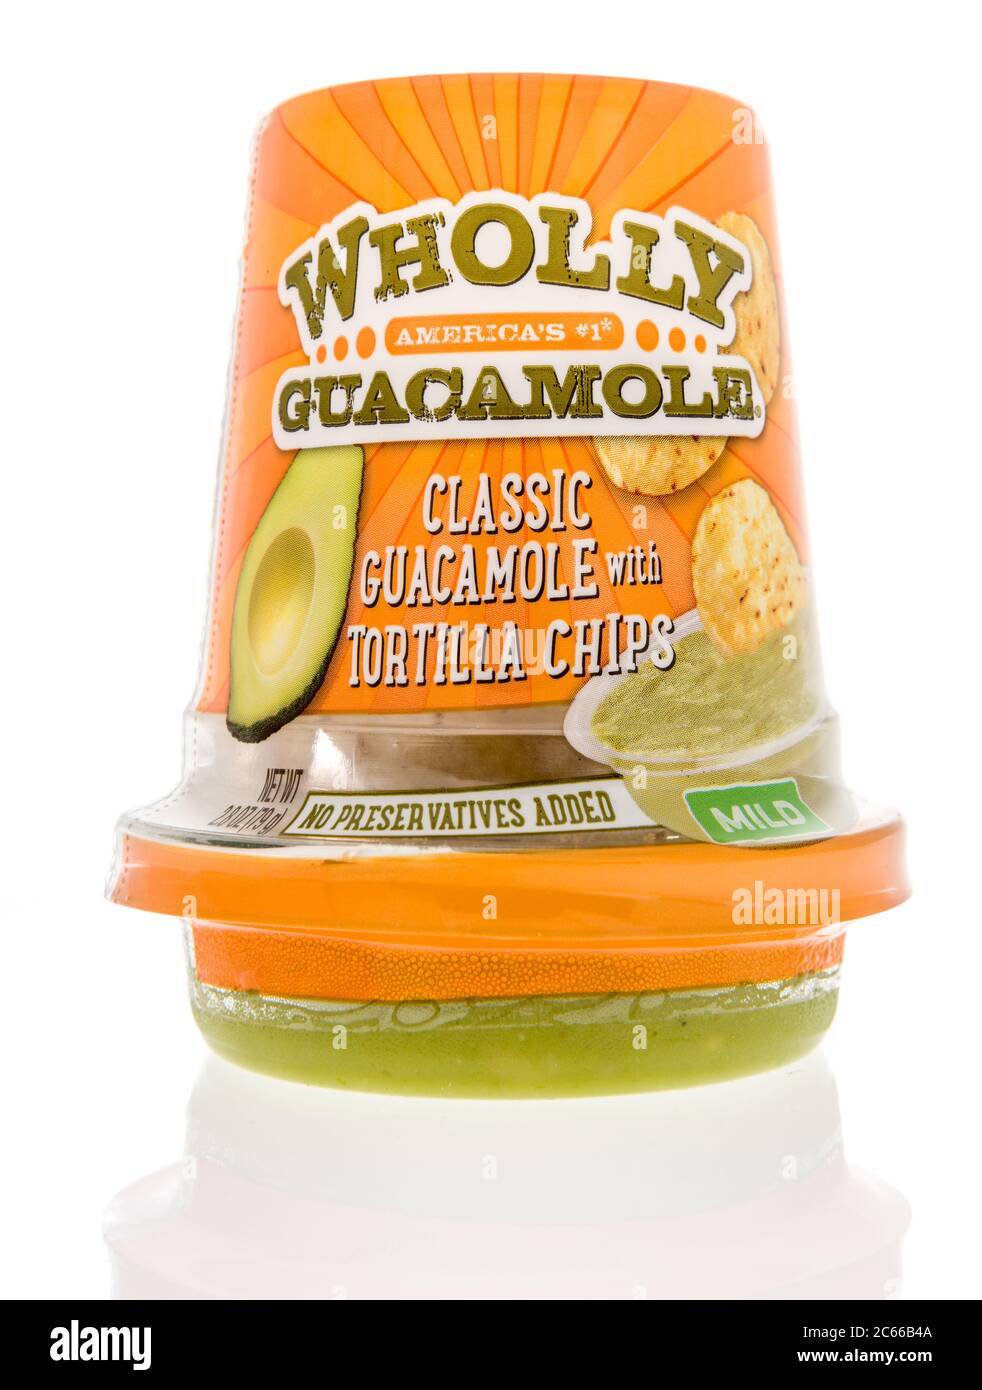 Winneconne,  WI - 26 June 2020: A package of Wholly guacamole classic with tortilla chips on an isolated background Stock Photo